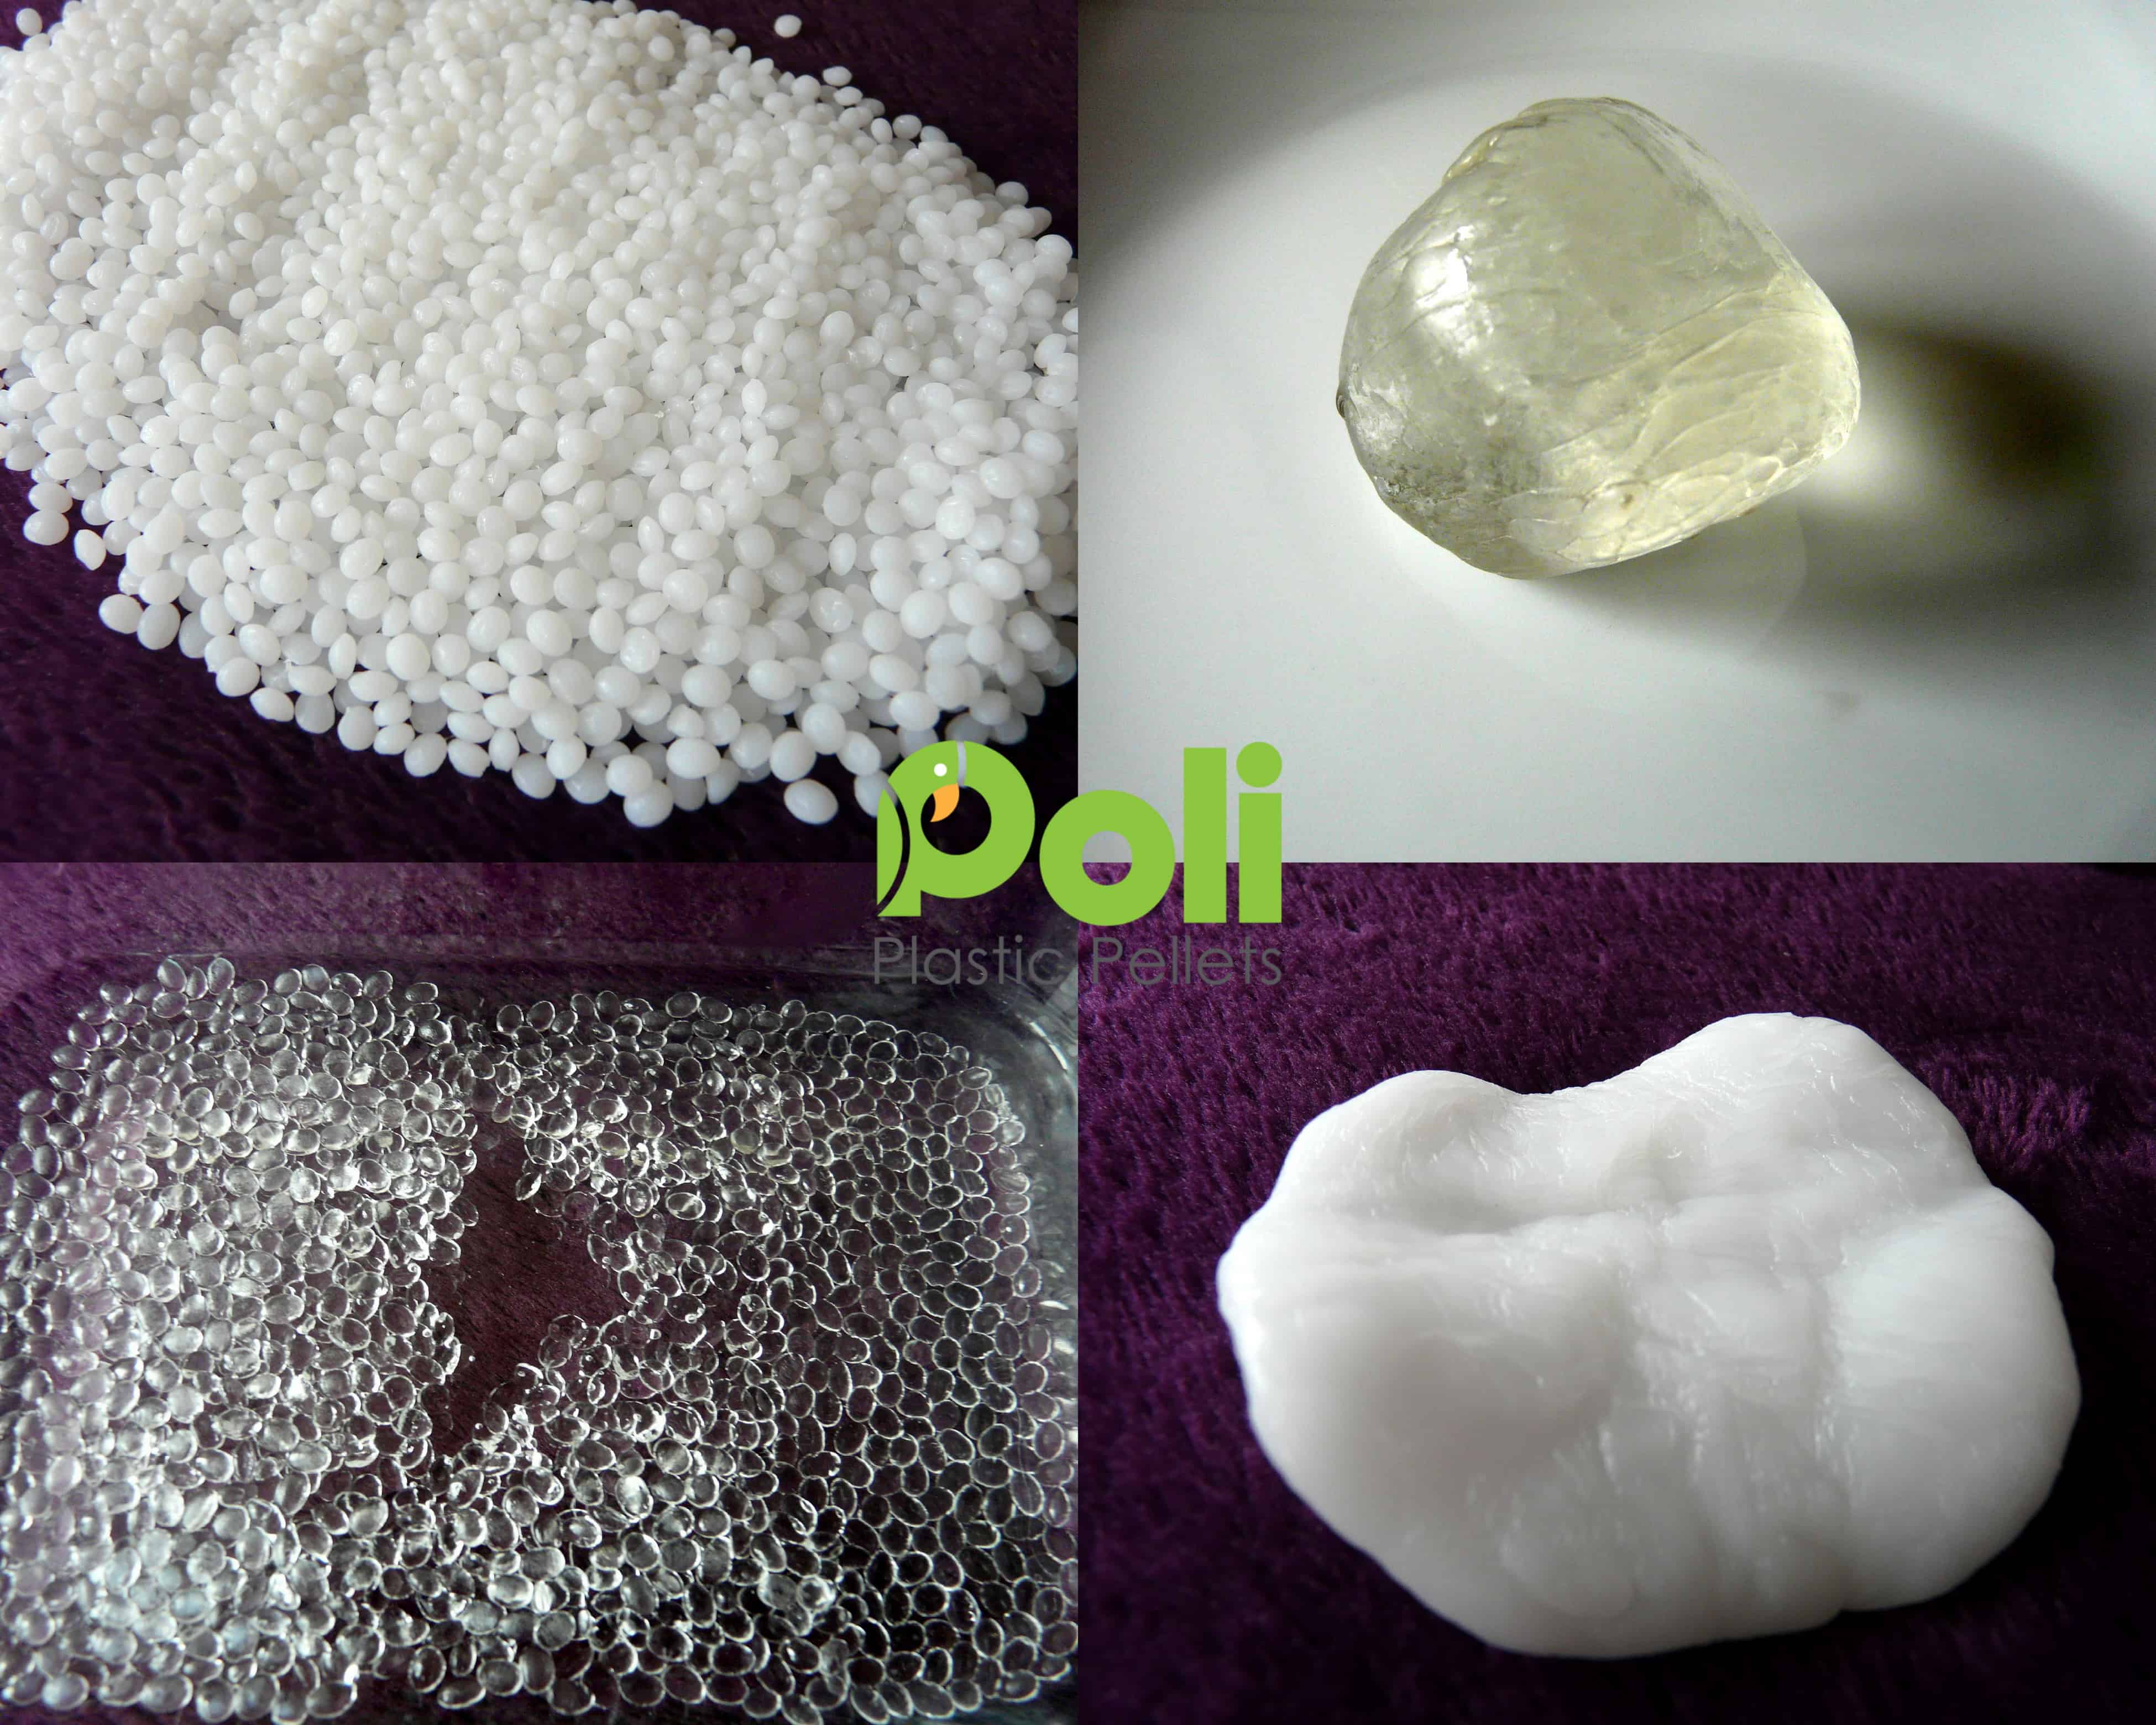 PRE-COLOURED Polymorph Friendly Plastic Mouldable Thermoplastic Pellets 